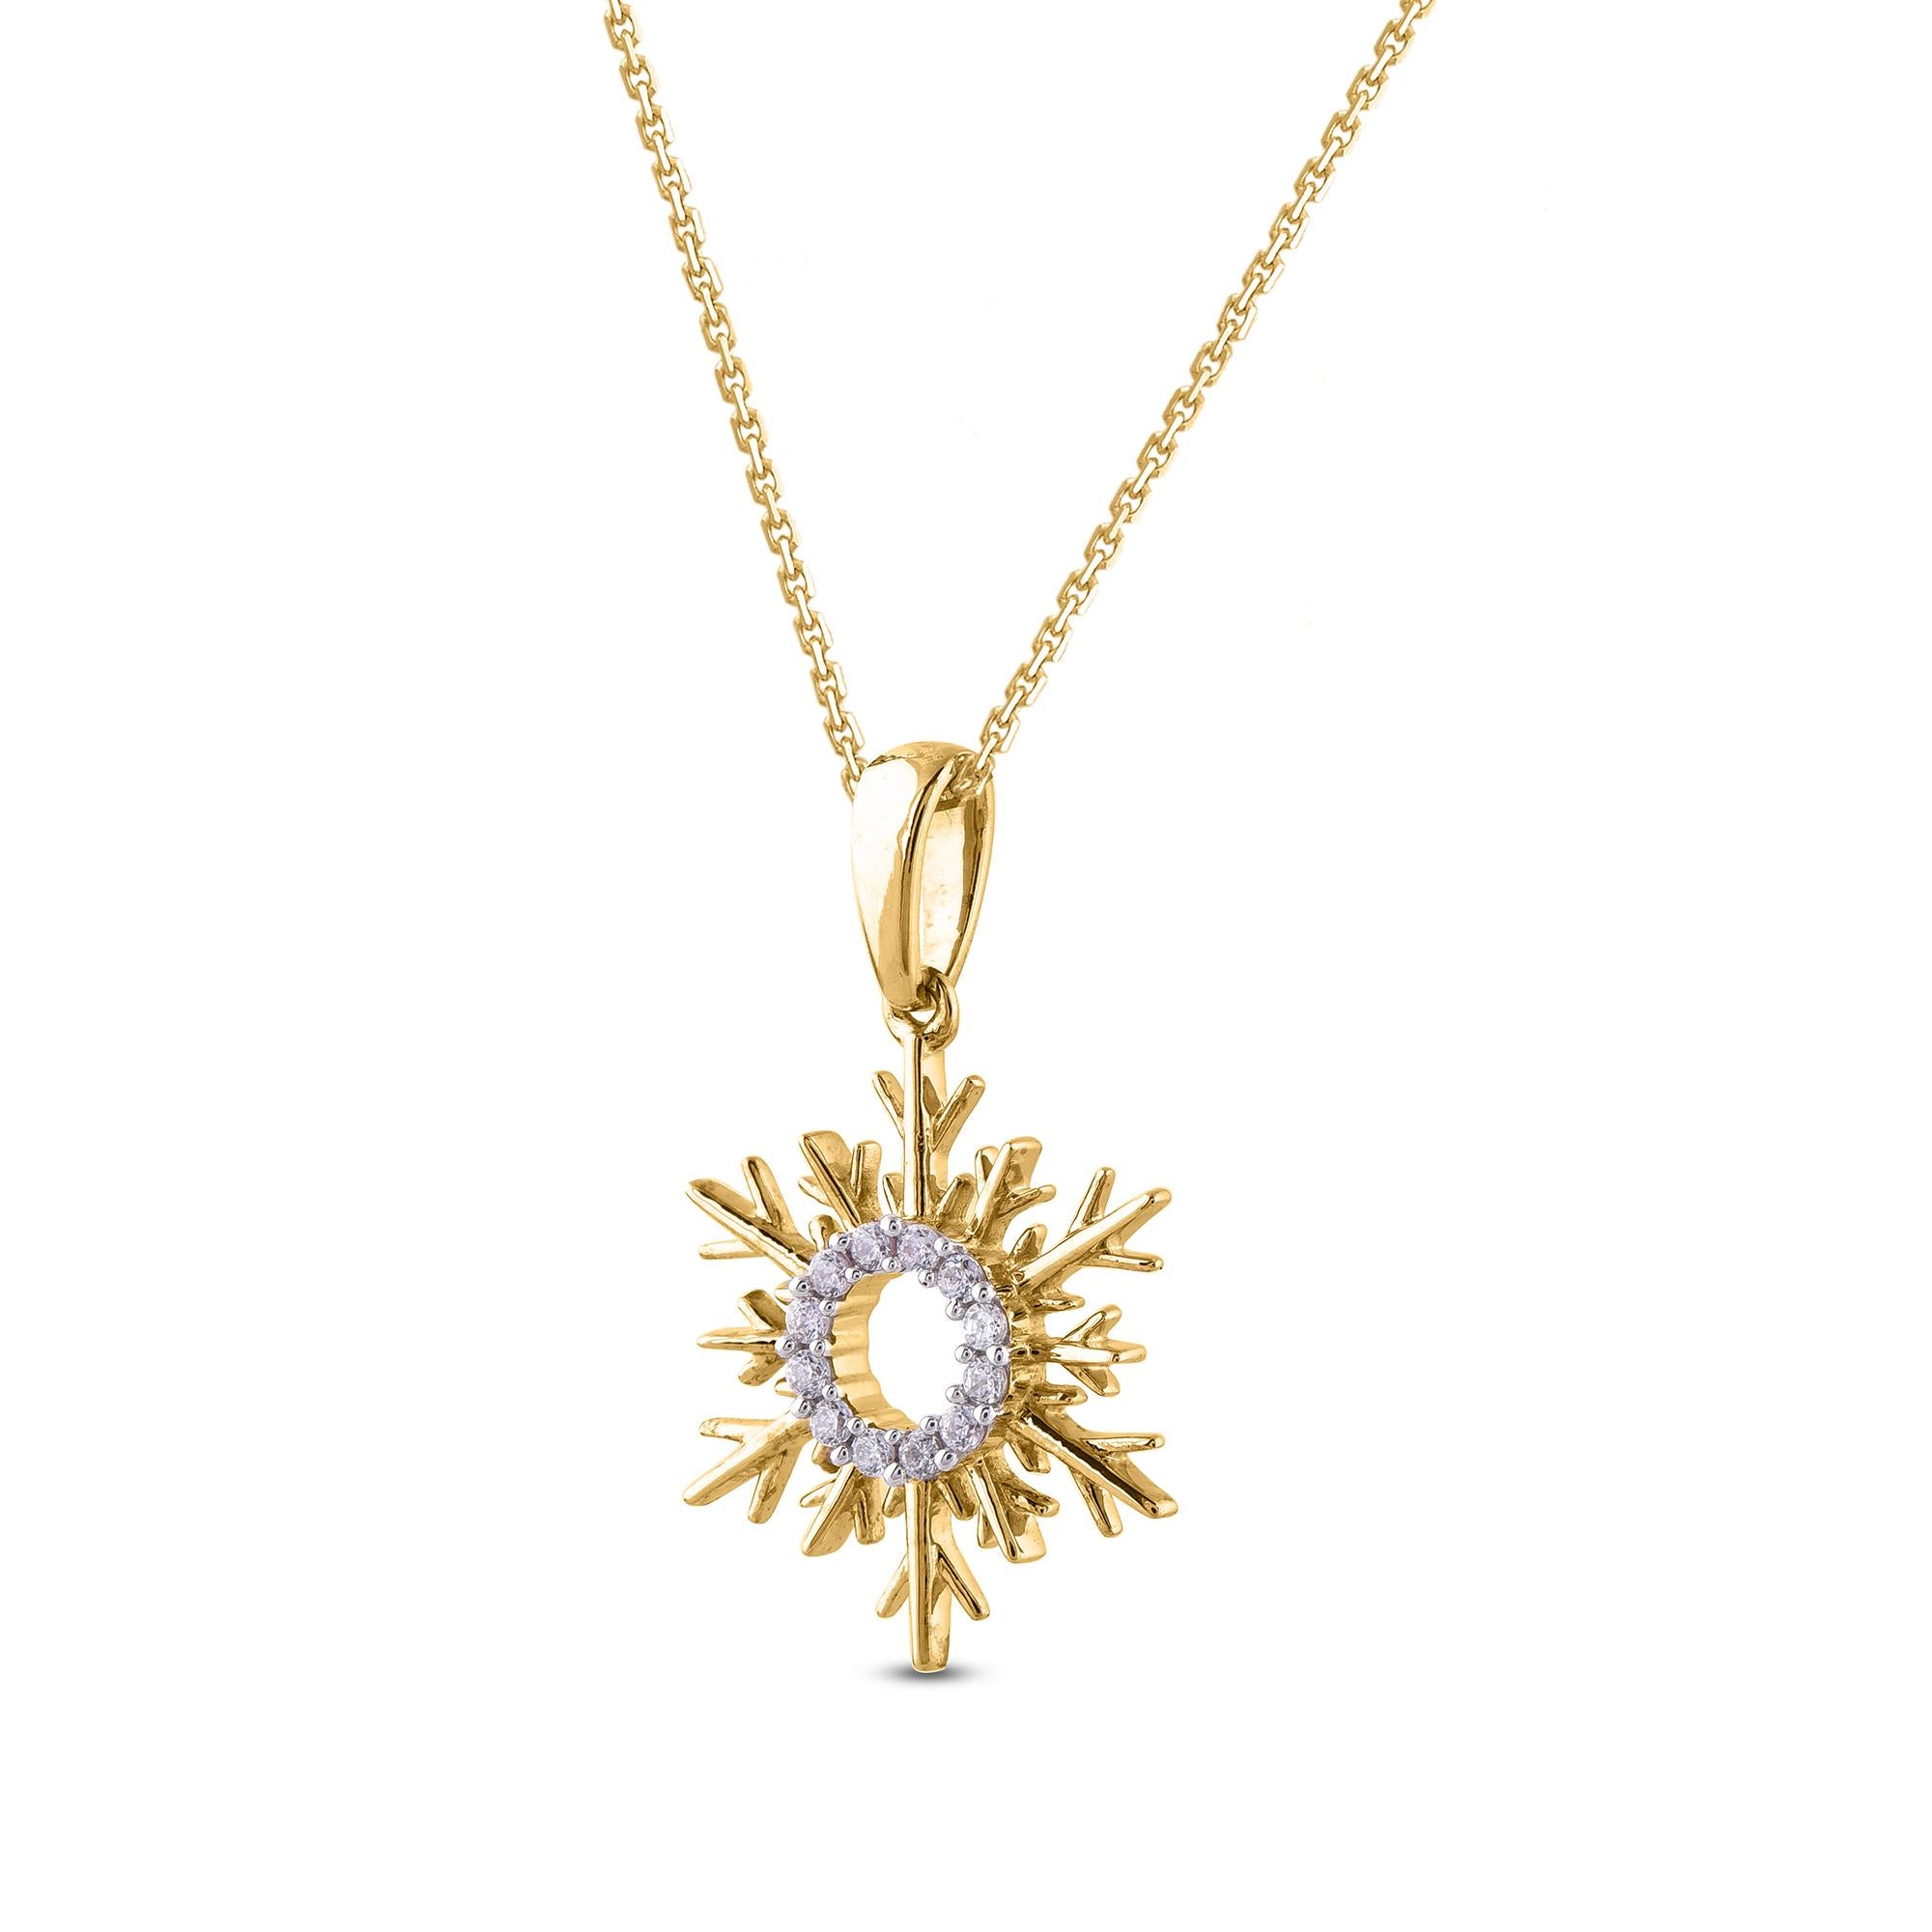 Embrace yourself with this breath-taking snowflake diamond studded pendant that is ready to make you shine. The pendant is crafted from 14 karat gold in your choice of white, rose, or yellow, and features 12 Round diamond set in prong setting, H-I